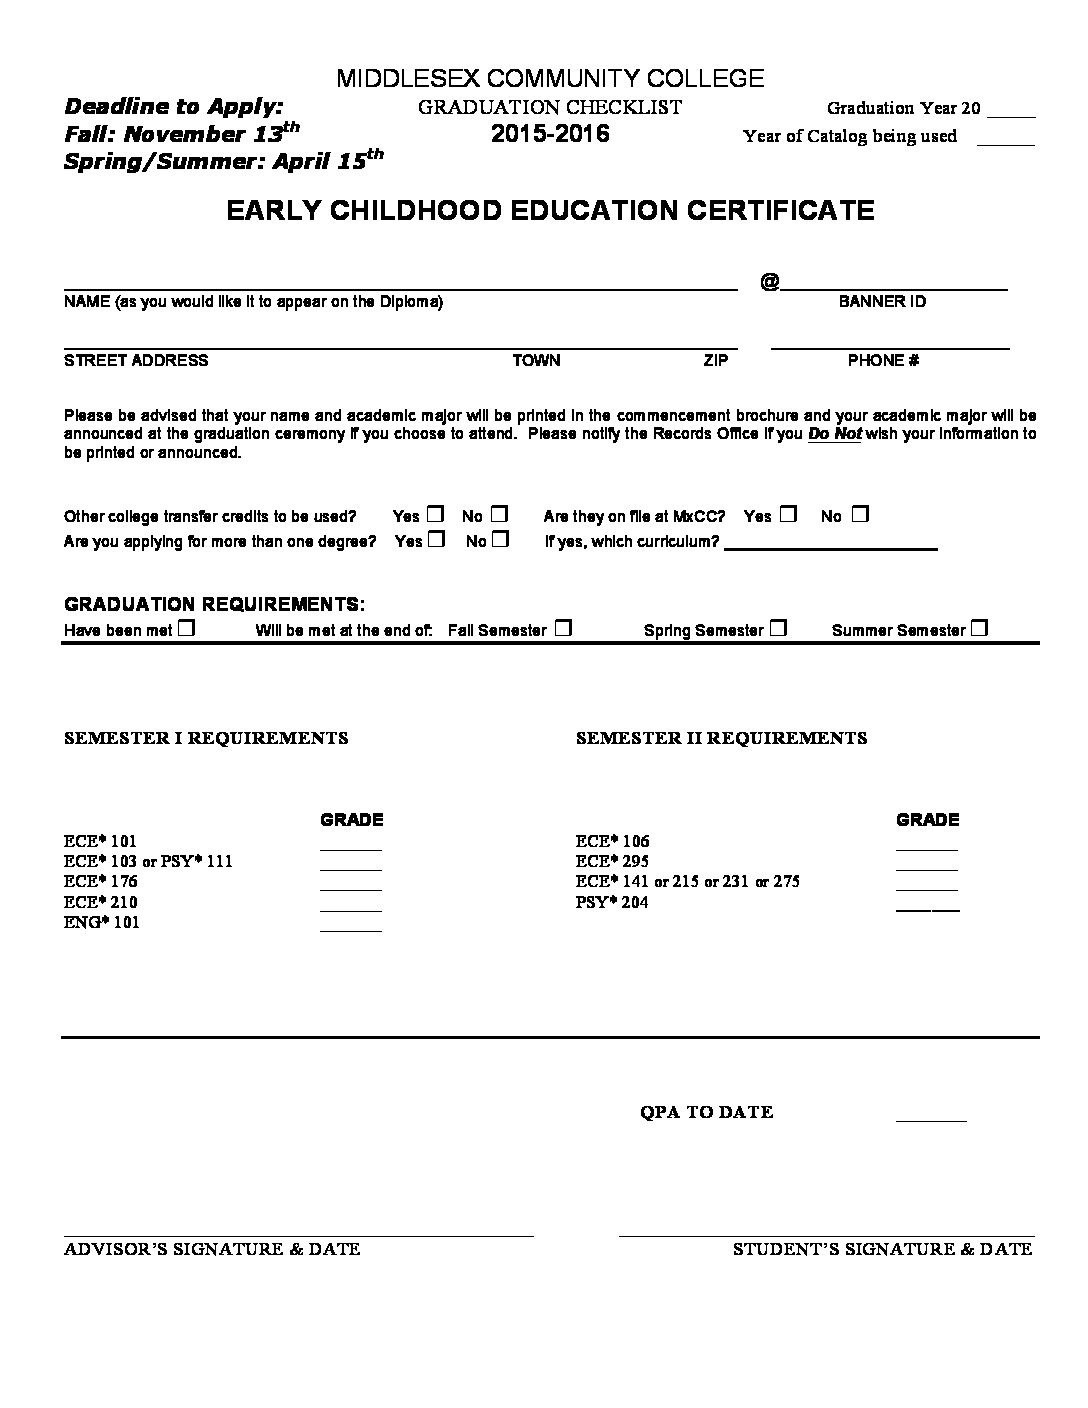 Early Childhood Education Certificate CT State Middlesex